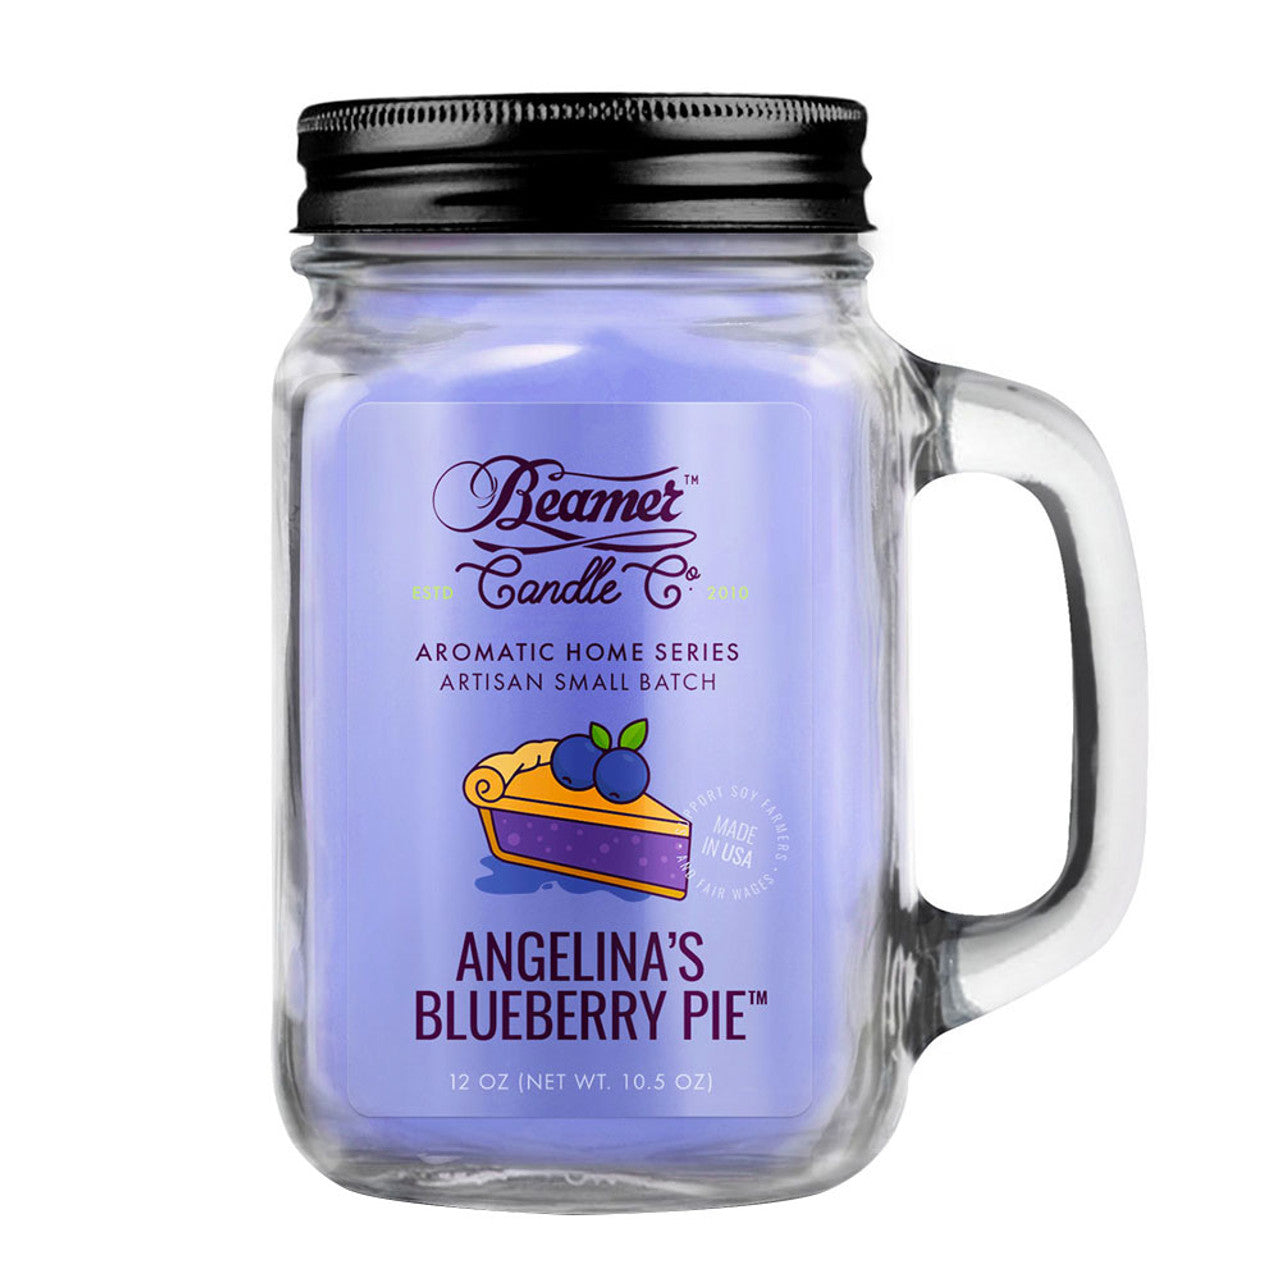 Beamer Candle Co - Angelina’s Blueberry Pie 12oz